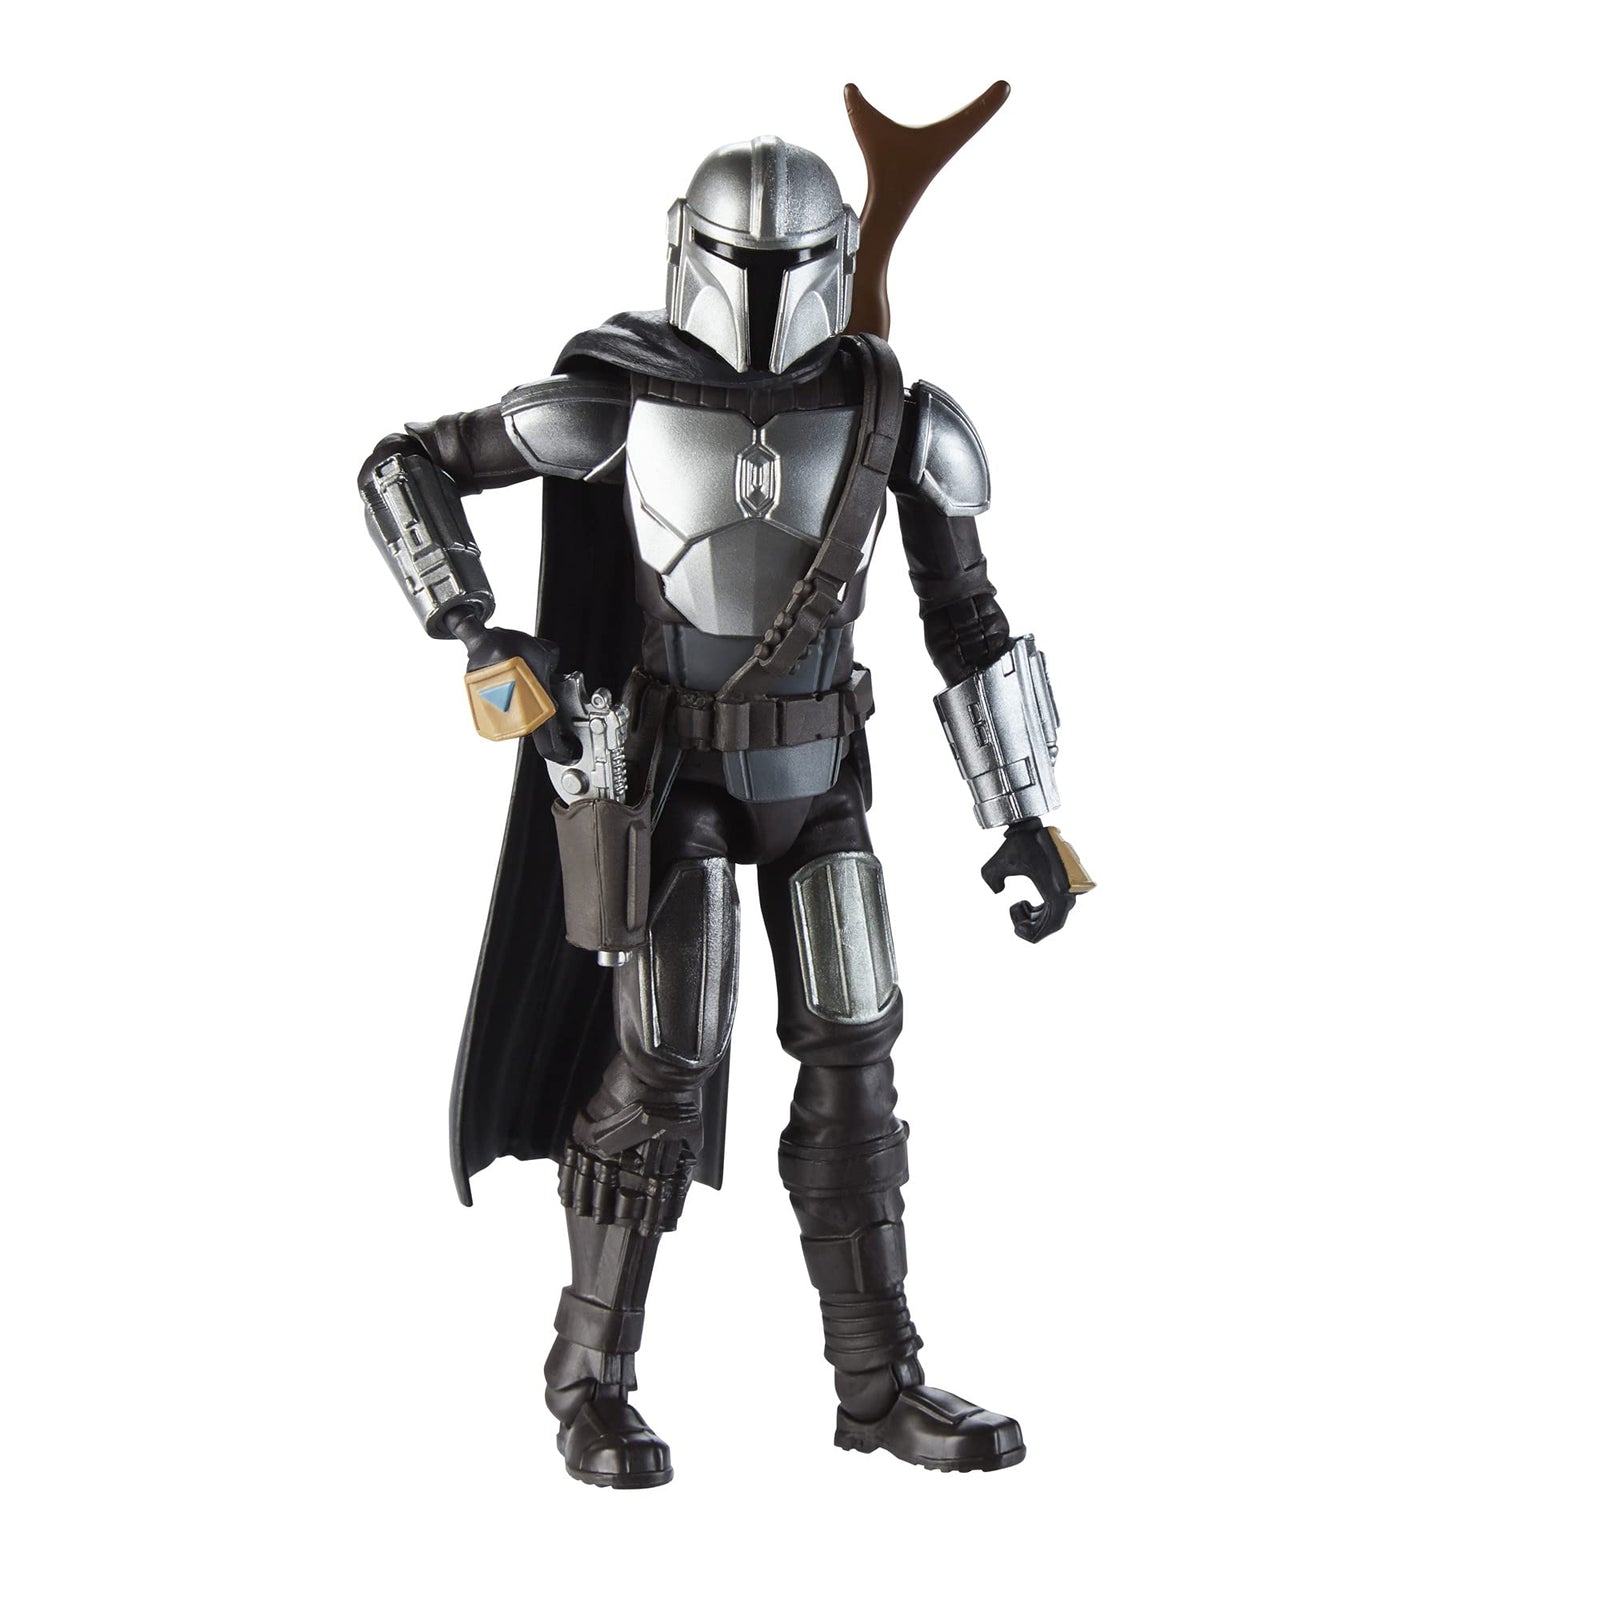 Star Wars Galaxy of Adventures The Mandalorian 5-Inch-Scale Figure 2 Pack with Fun Blaster Accessories, Toys for Kids Ages 4 and Up (Amazon Exclusive),F3892